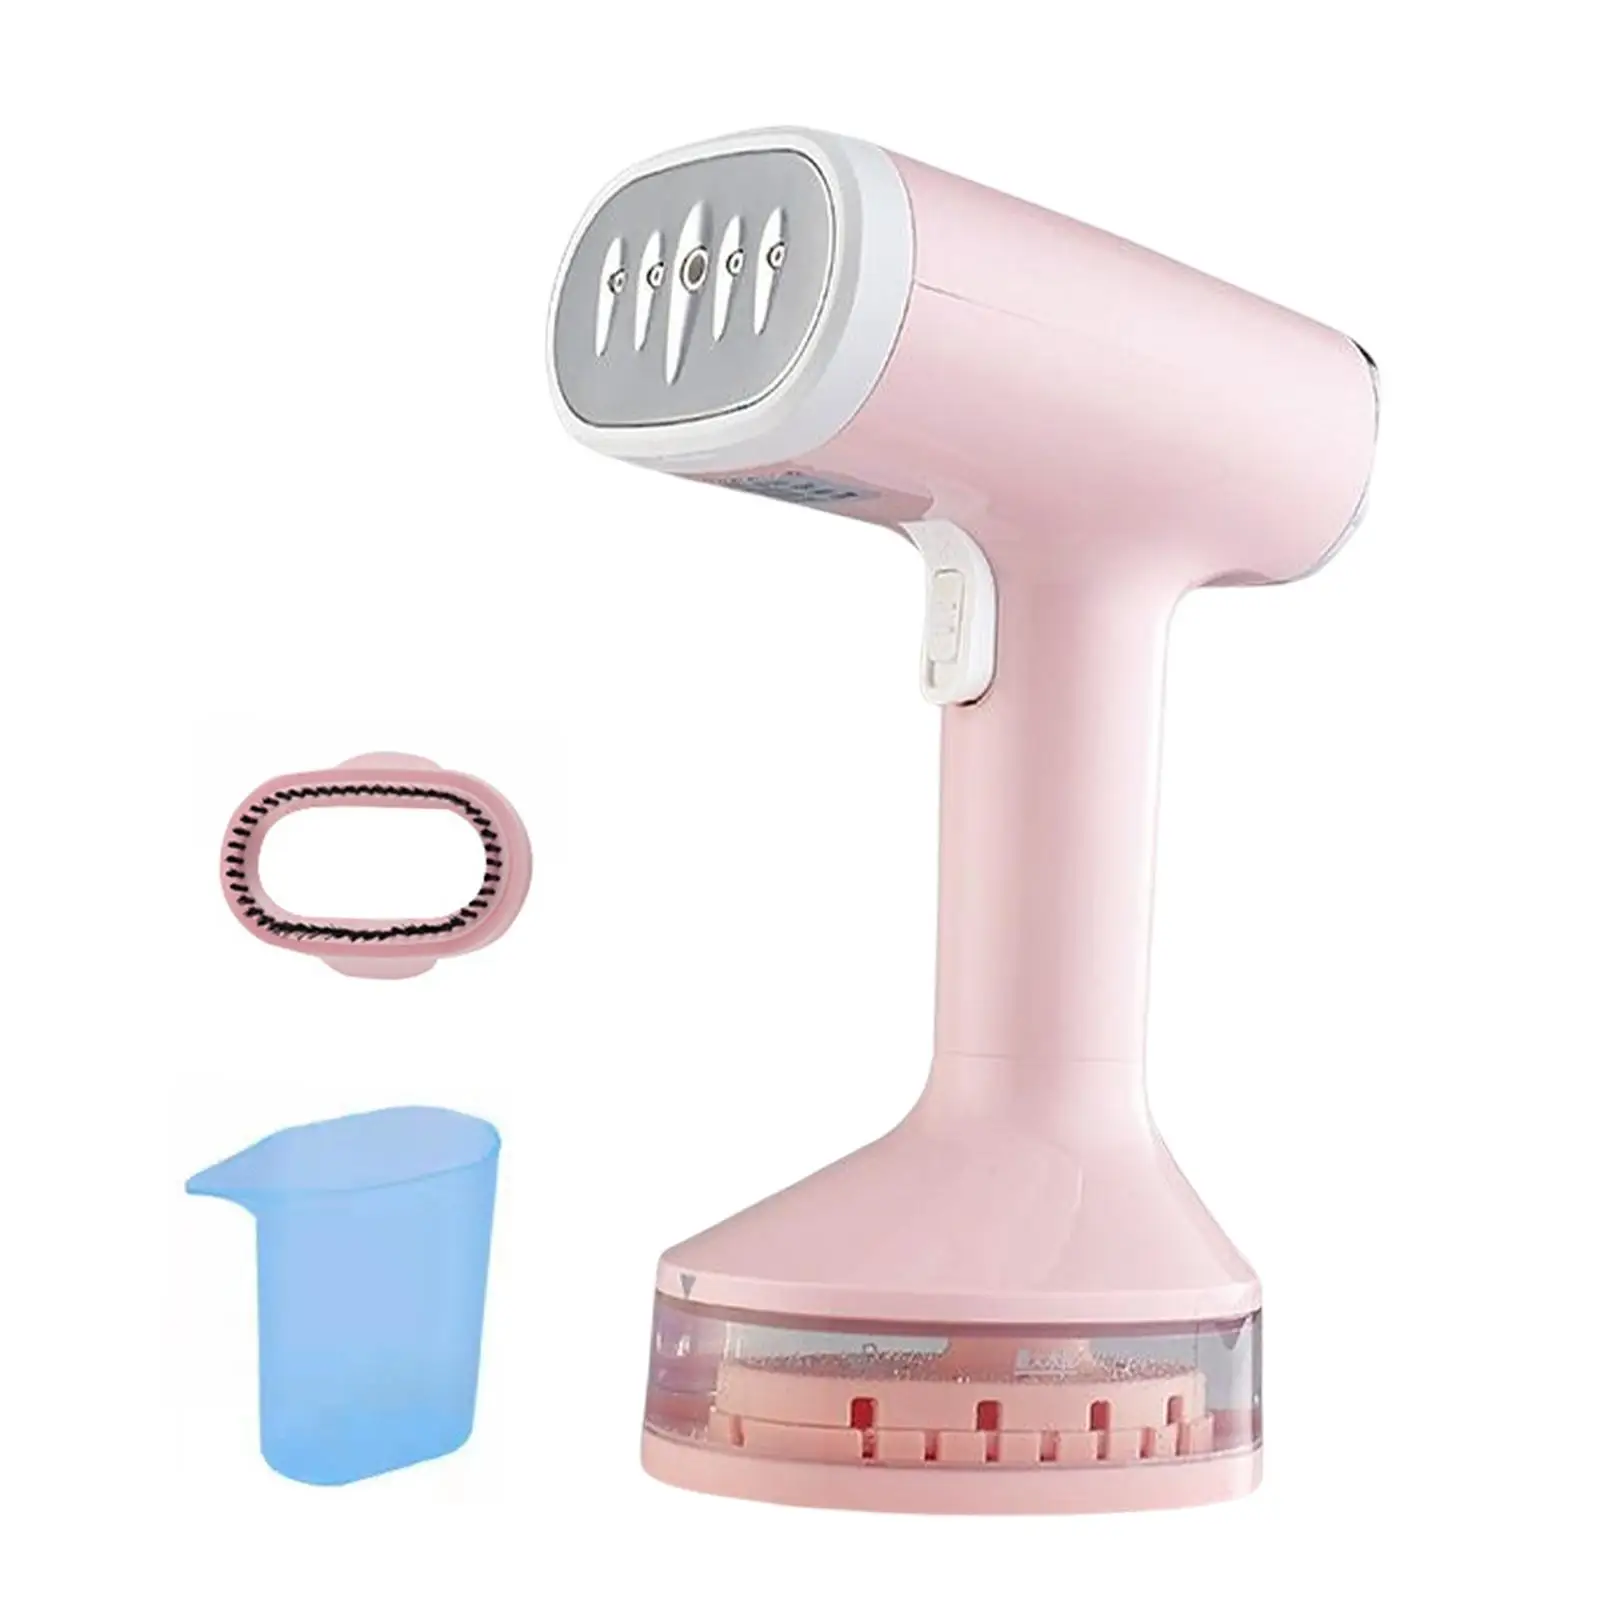 Professional Handheld Garment Steamer UK Plug and Wet Ironing Mini Steam Iron for Travel Outing Household Clothes Ironing